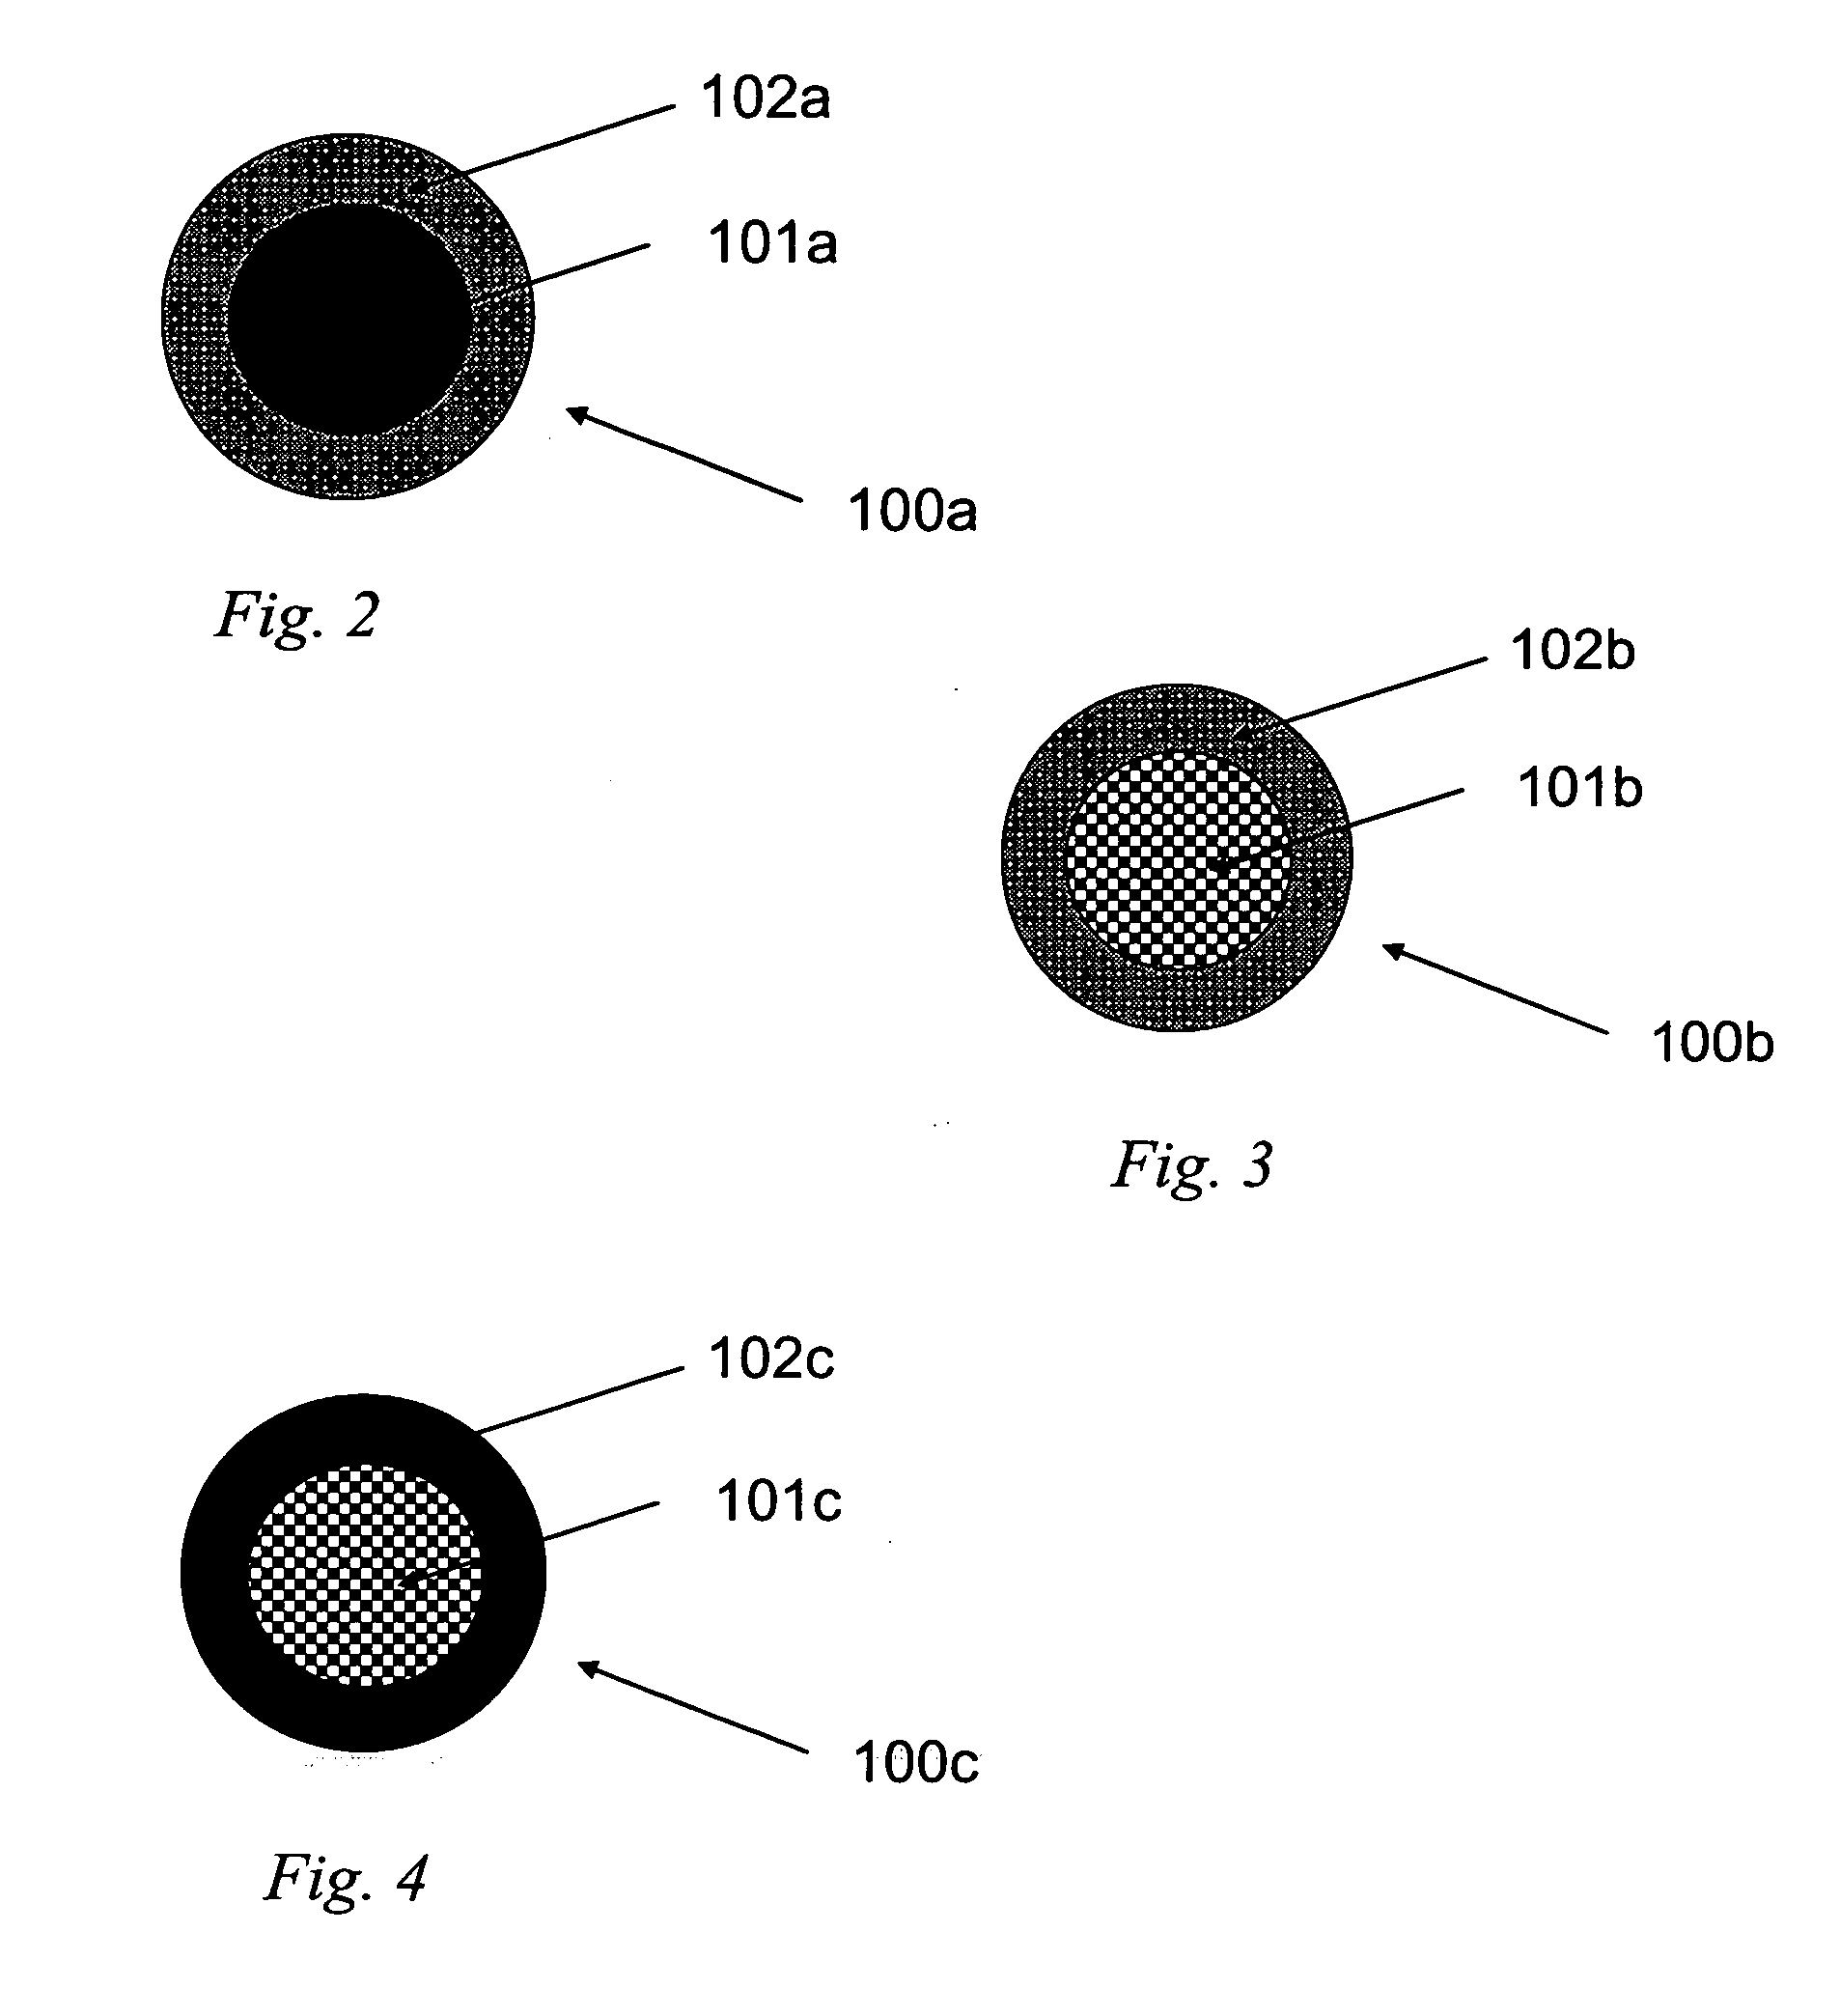 Nanoparticle-based imaging agents for X-ray/computed tomography